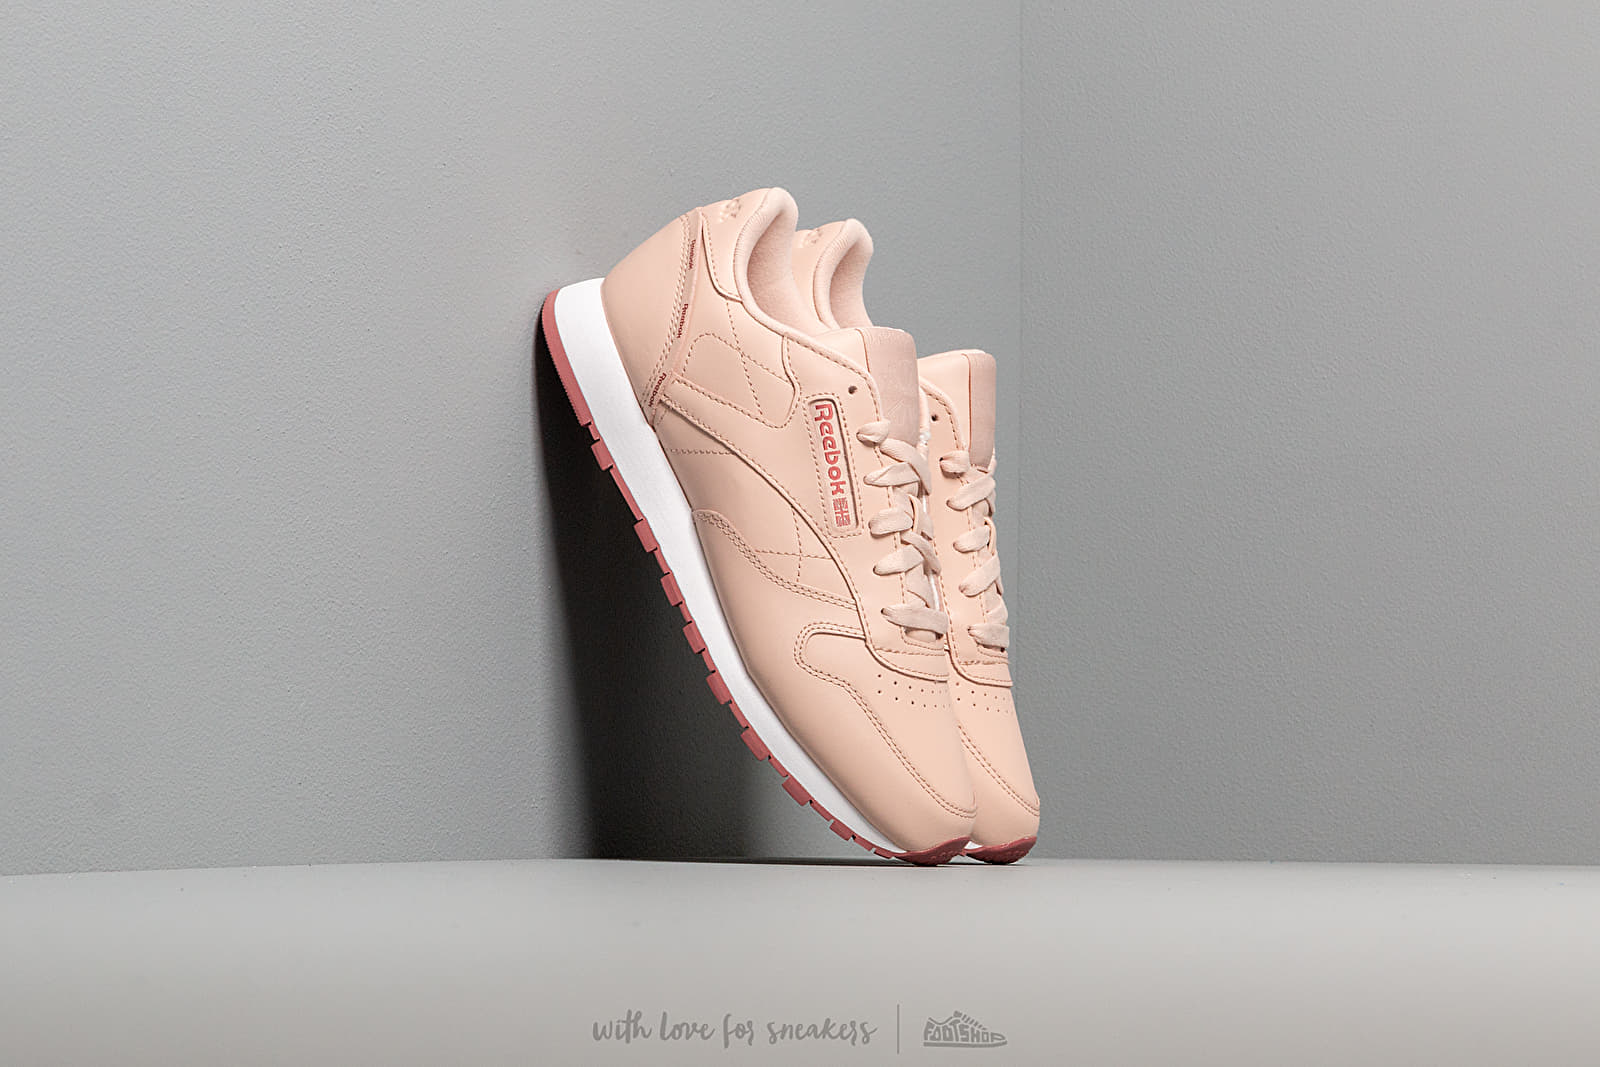 Chaussures et baskets femme Reebok Classic Leather Buff/ Rose Dust/ White